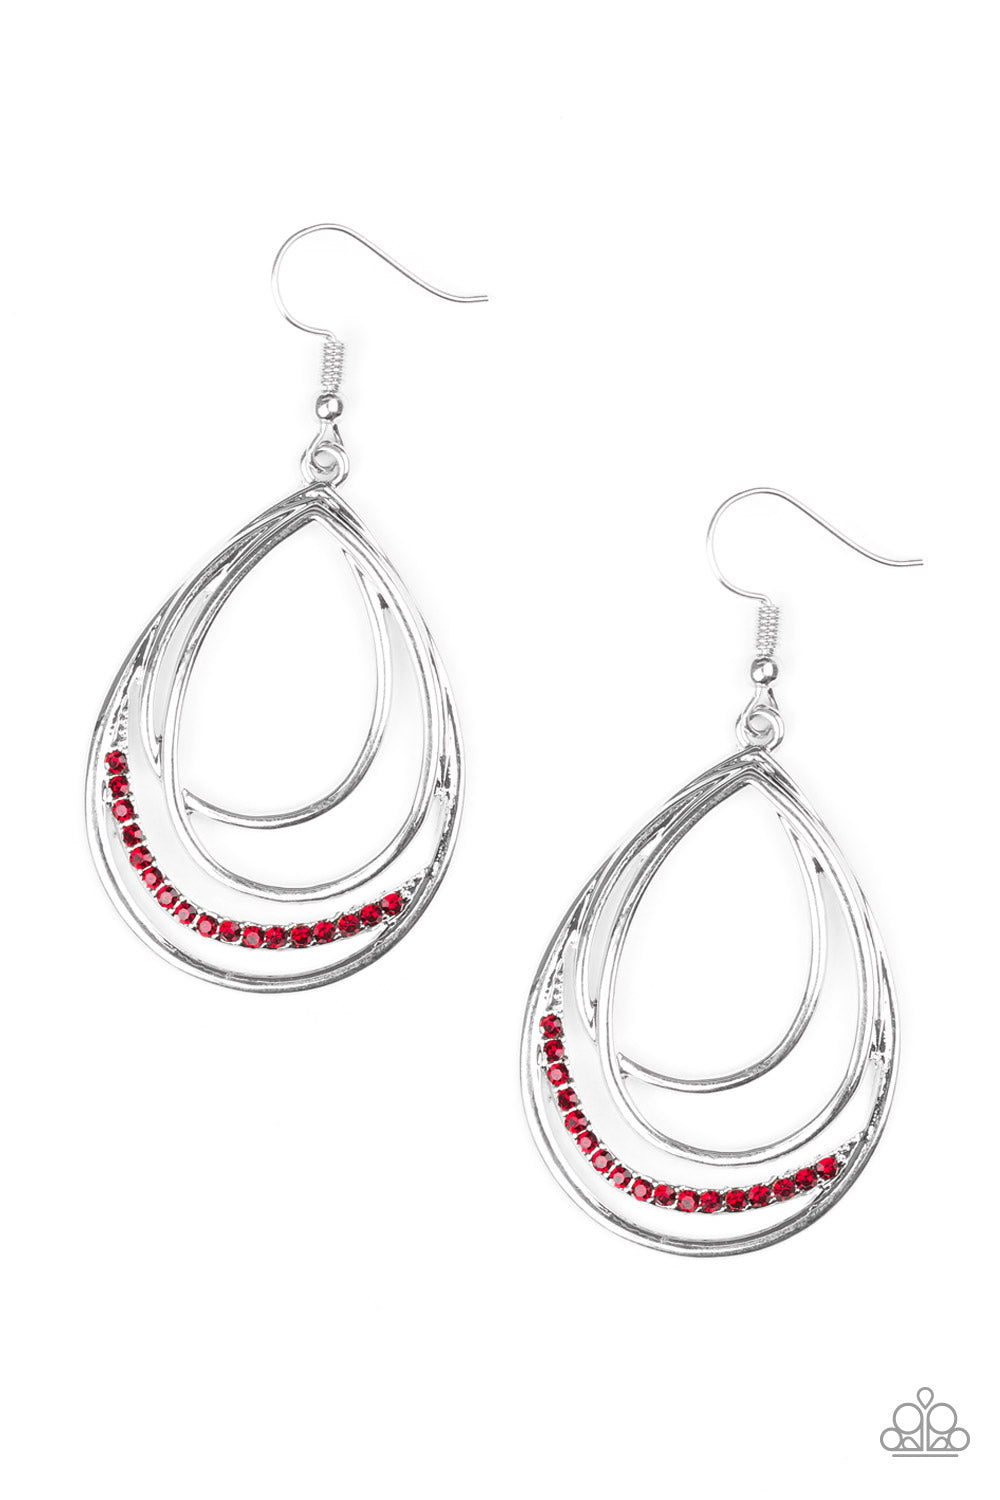 Start Each Day With Sparkle - Red earrings